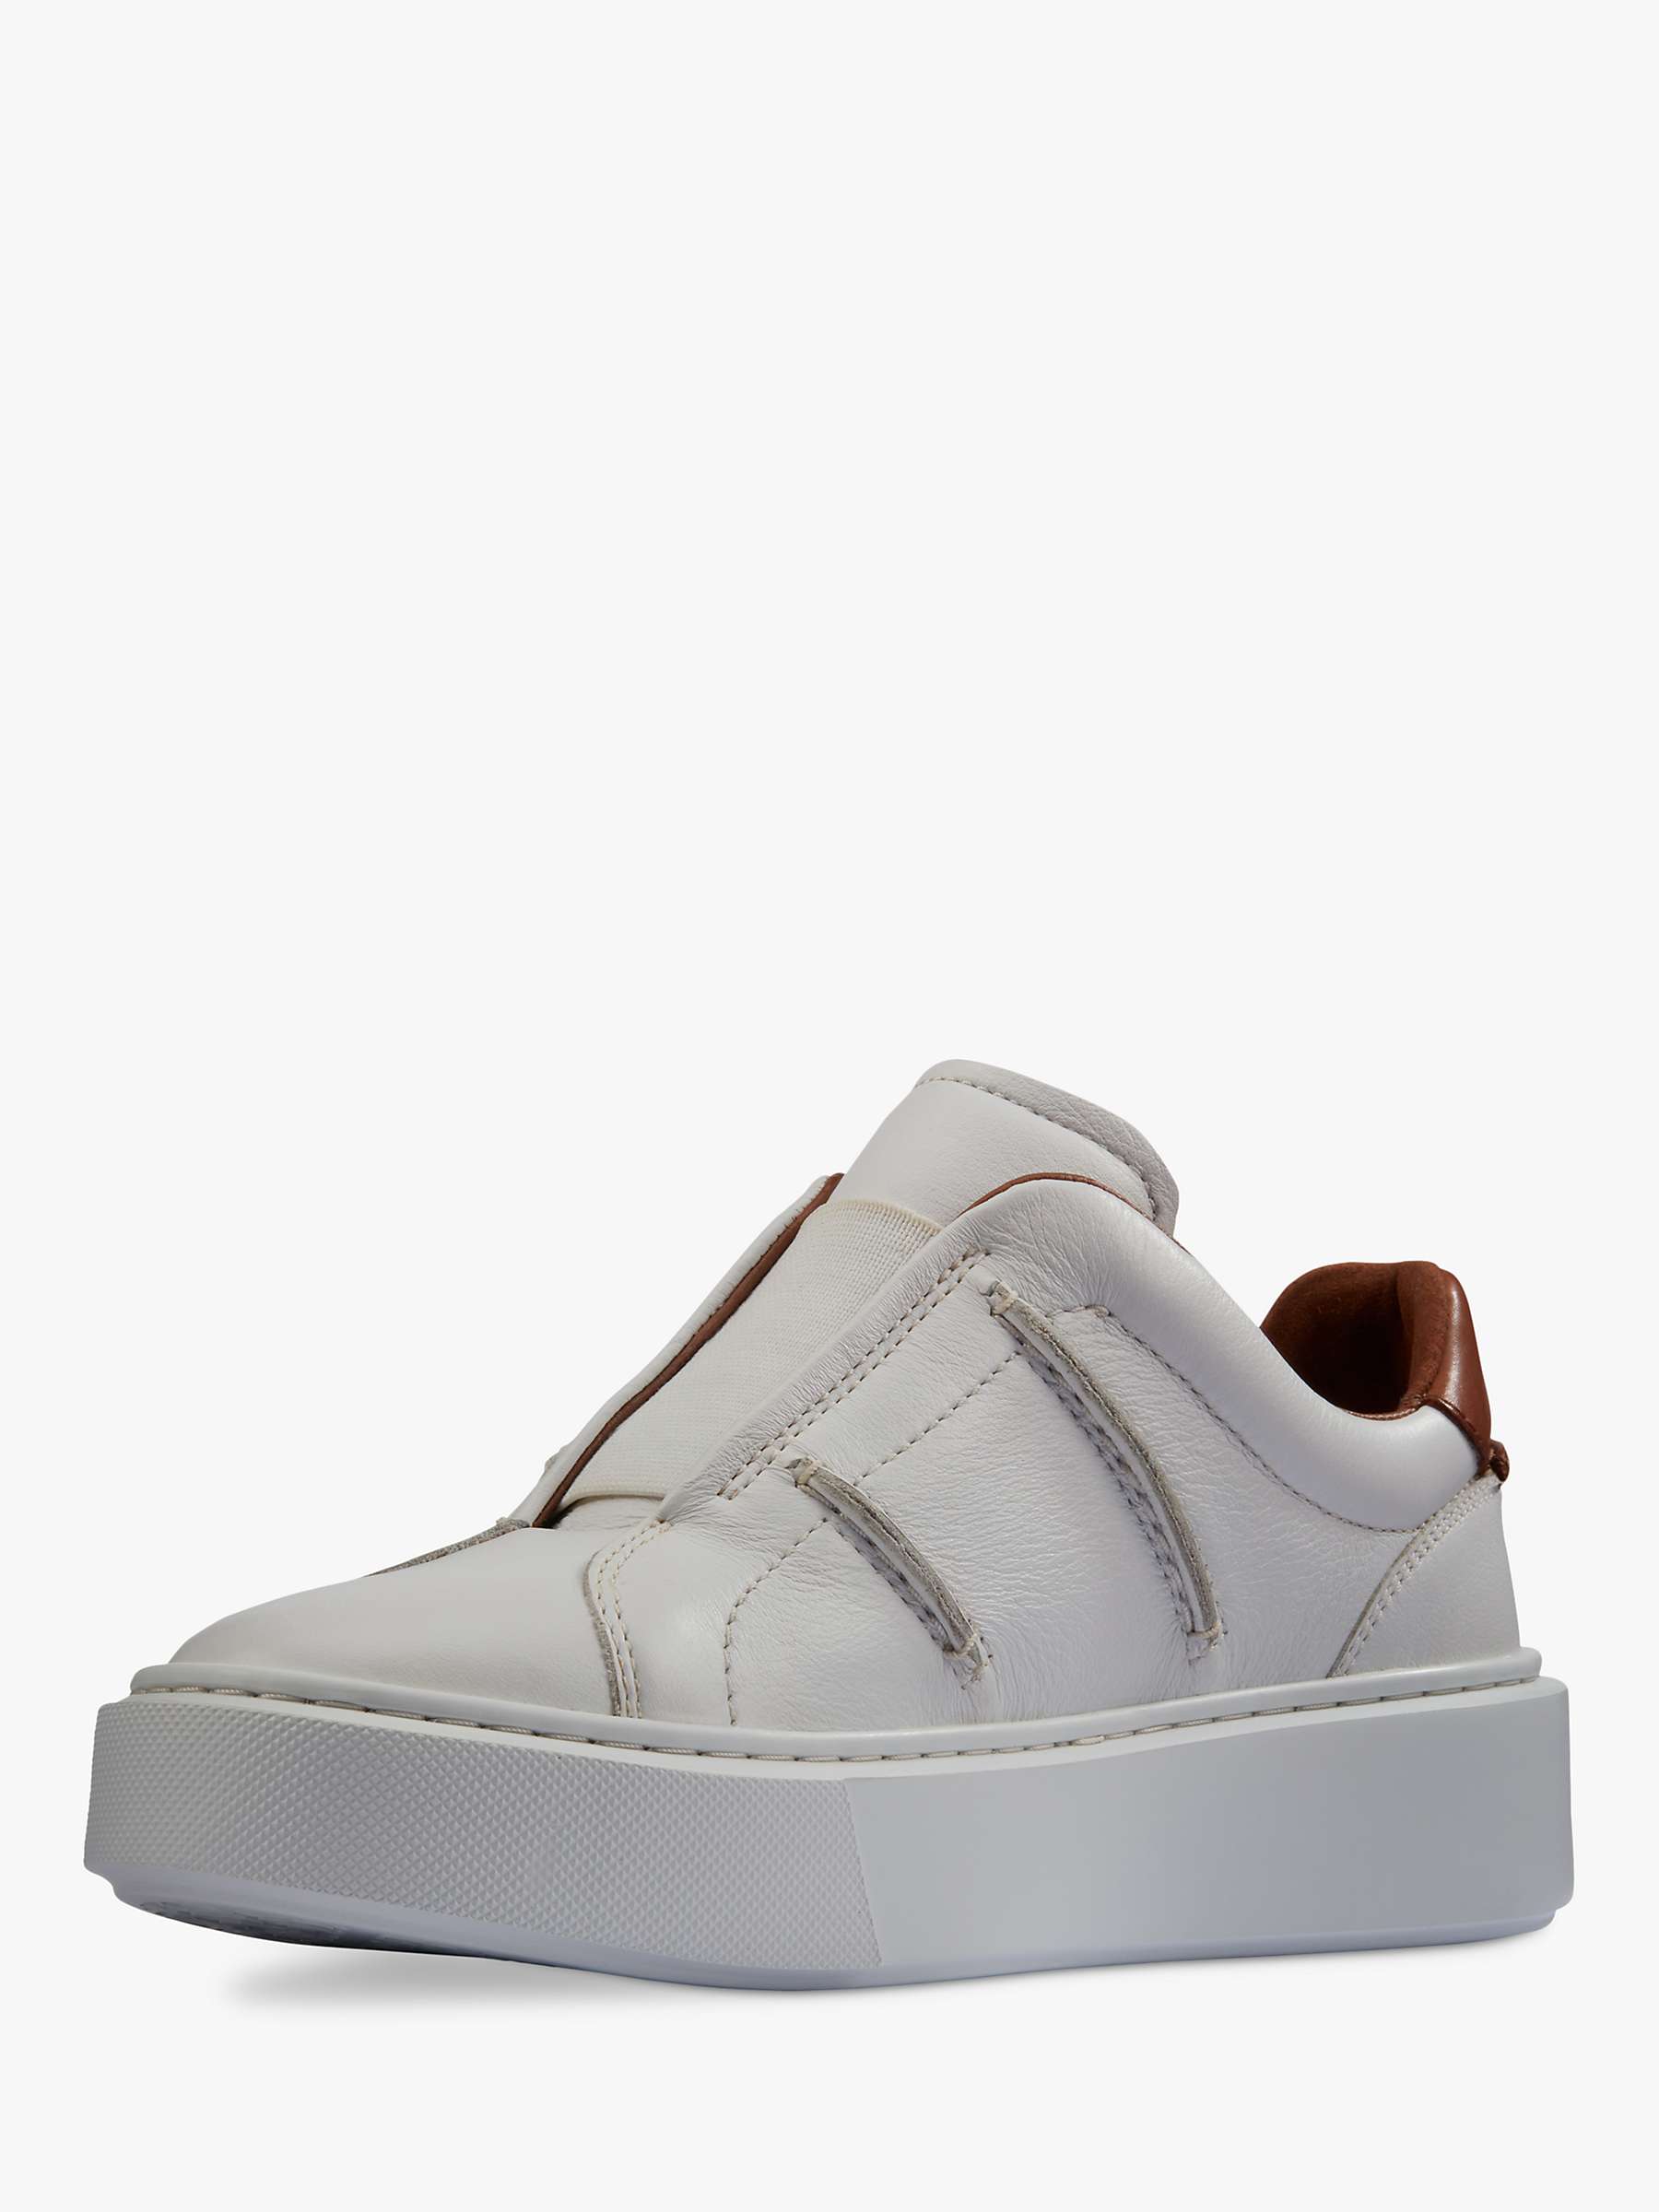 Buy Clarks Hero Lite Slip On Leather Trainers Online at johnlewis.com